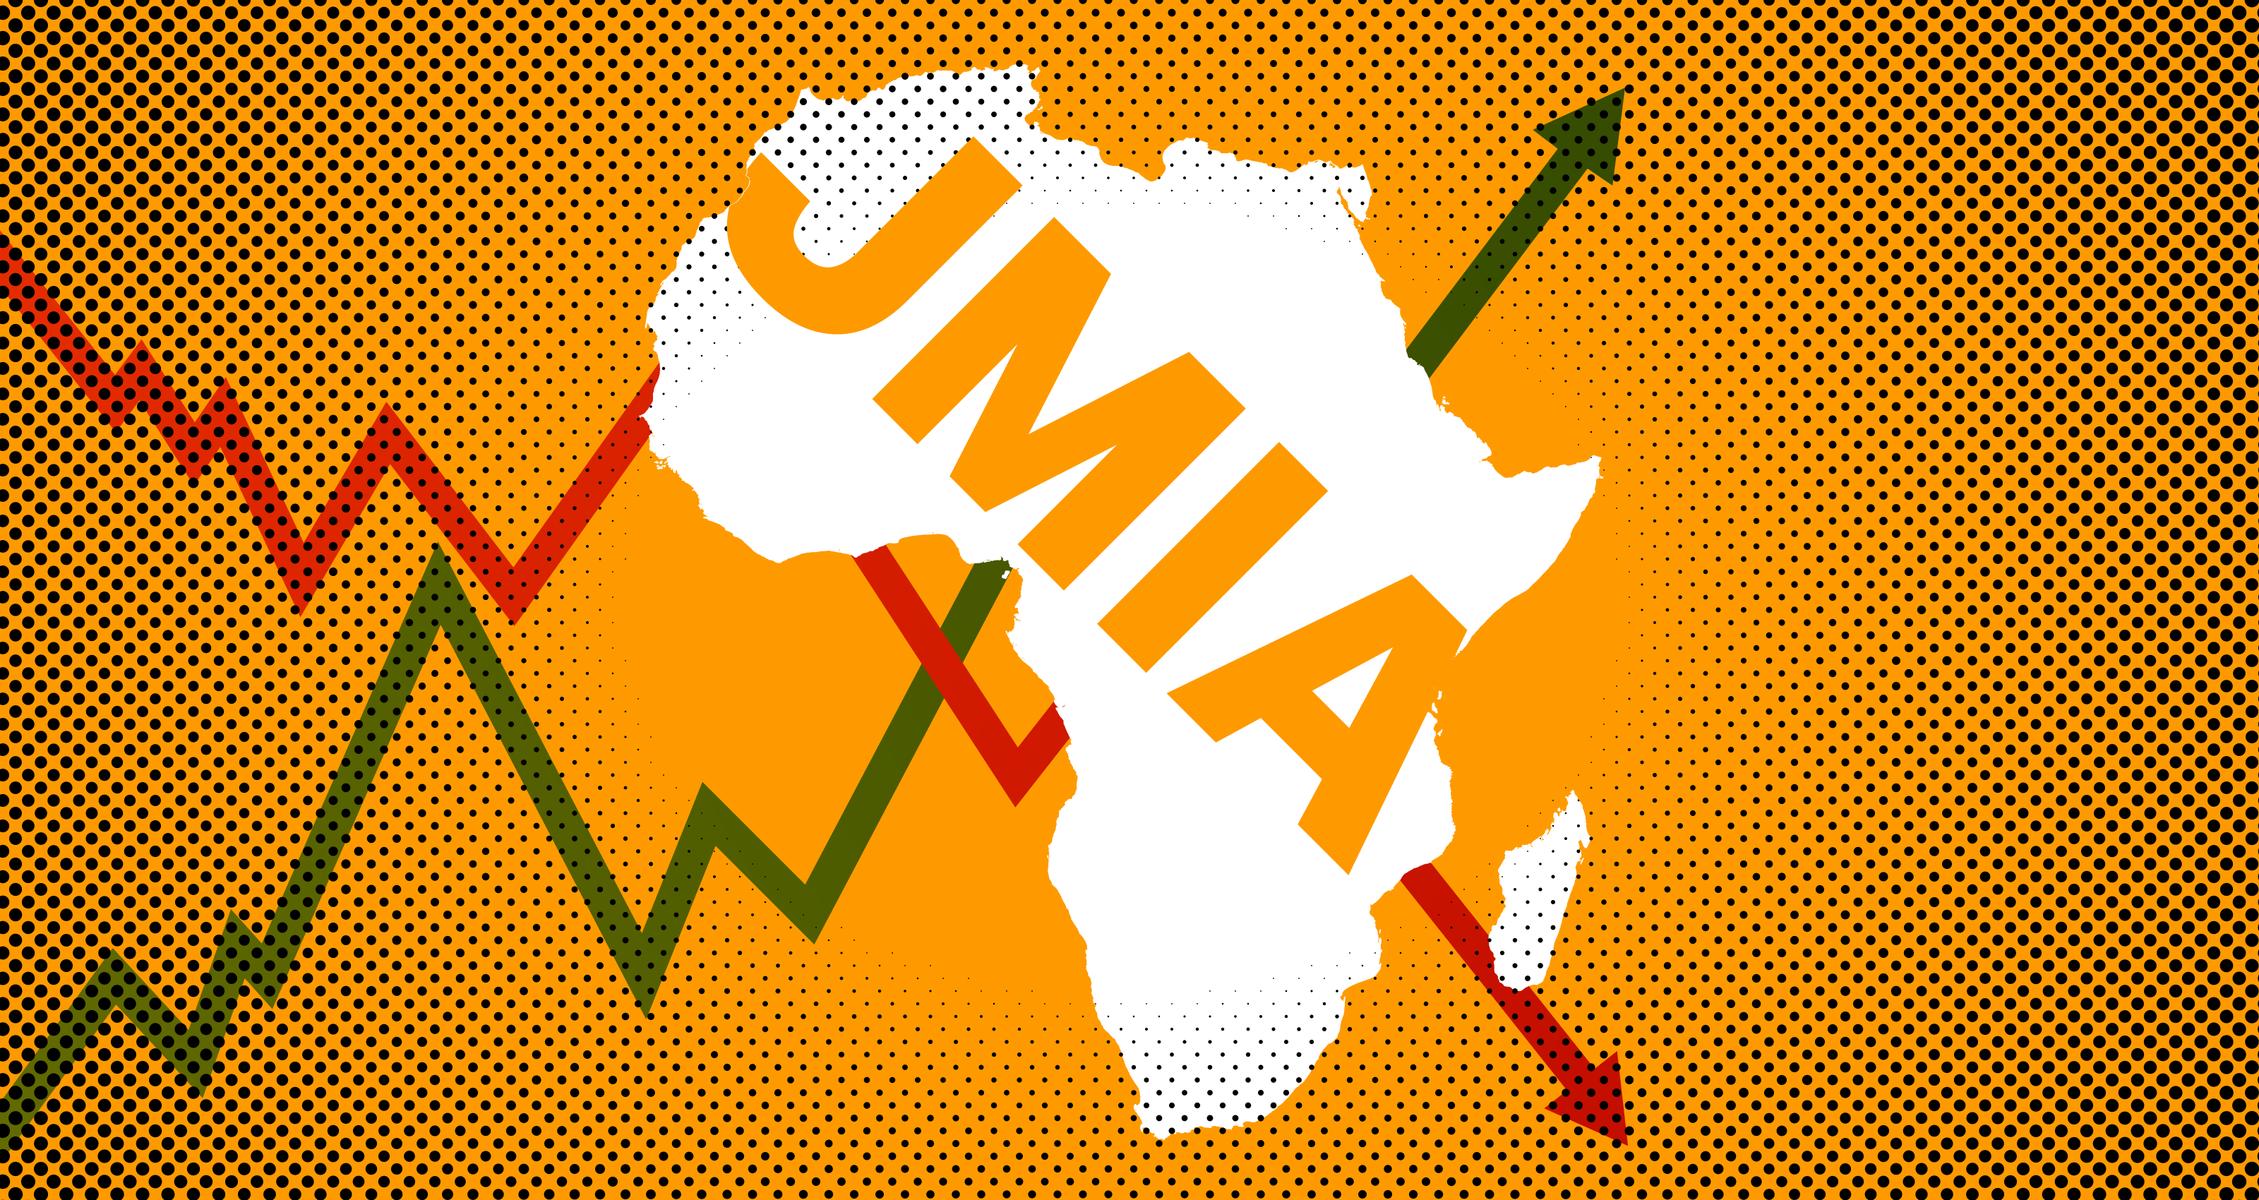 Jumia expects losses not to exceed $100M this year, per Q3 financials